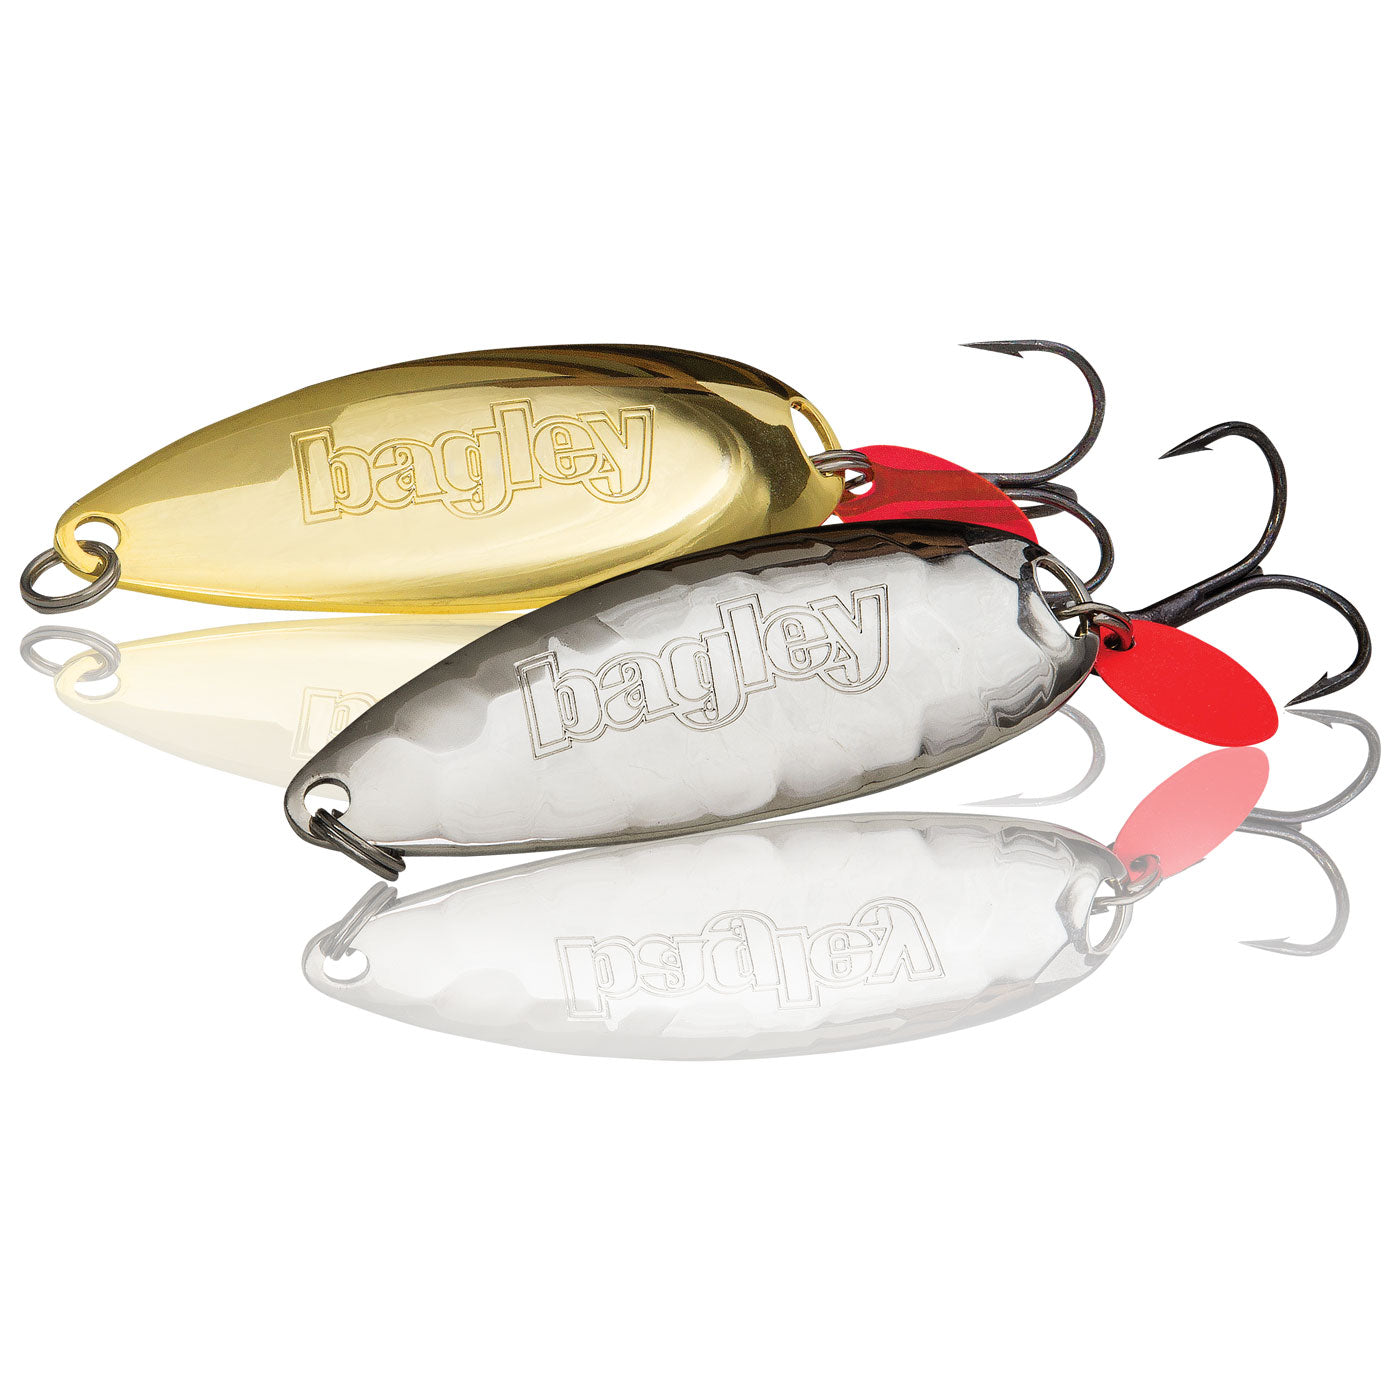 Bagley Bright Casting Spoons Red Tab